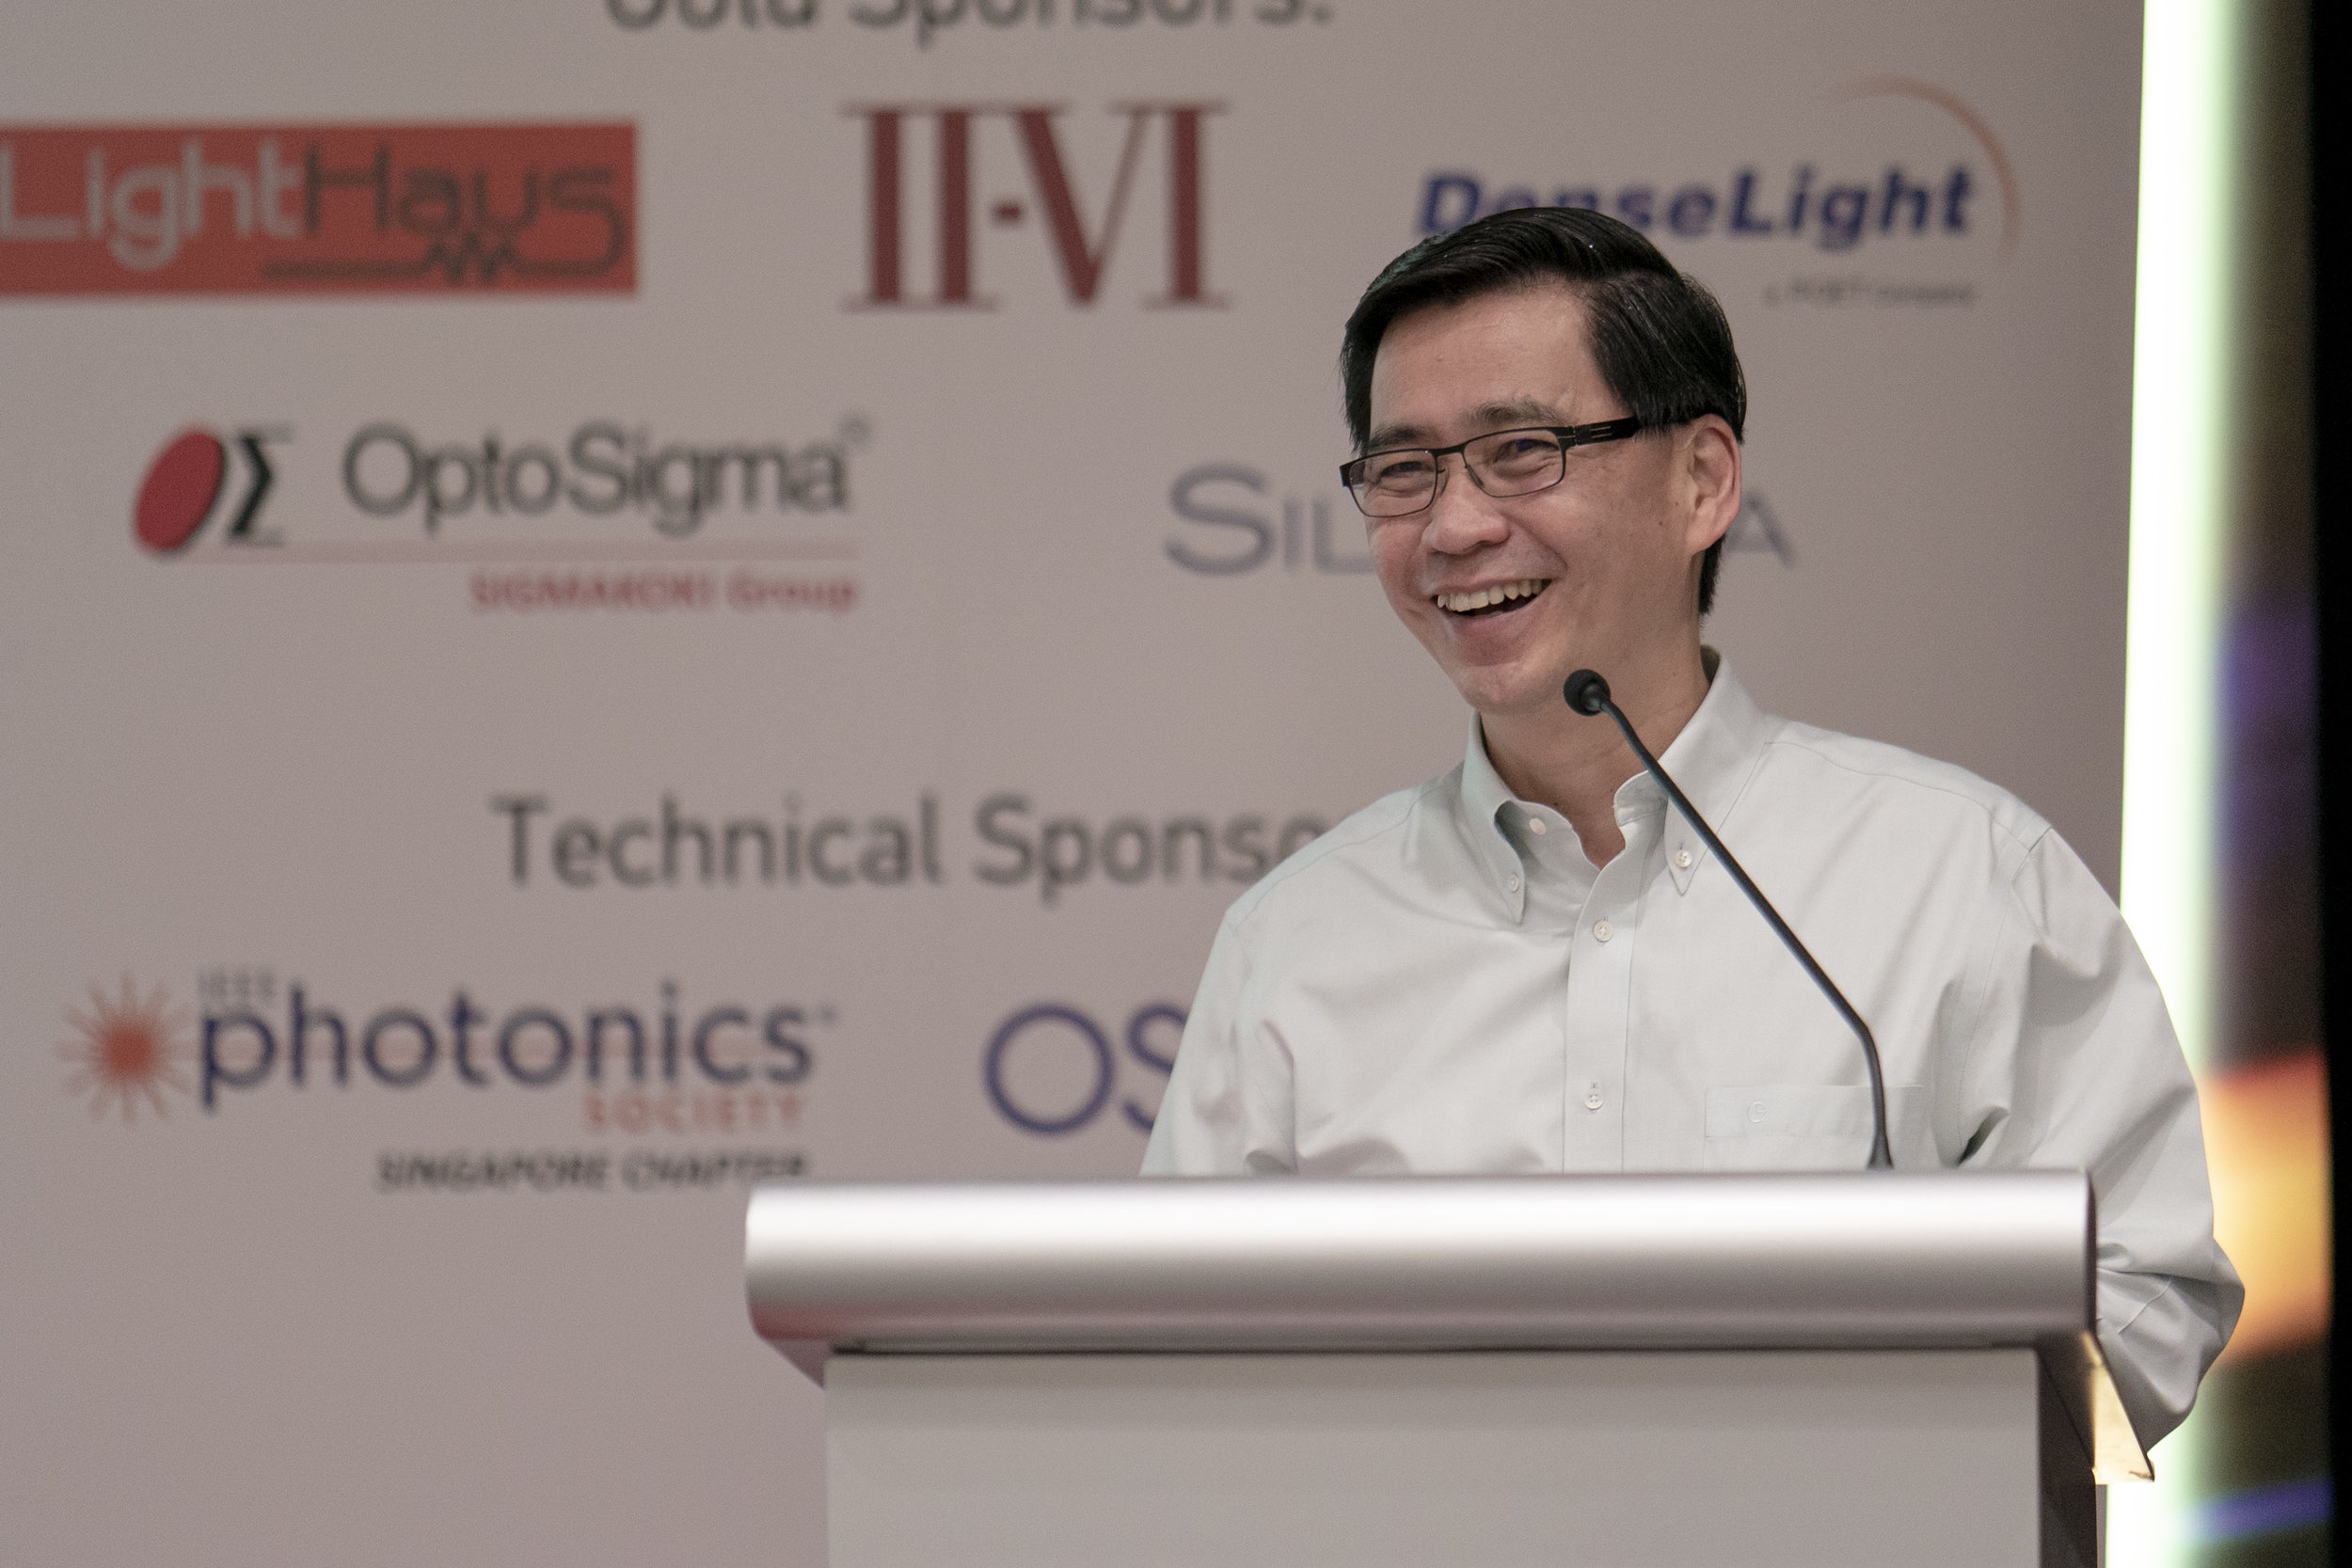 TPI Photonics SG 2018 Conference n Exhibition 0149rc.jpg